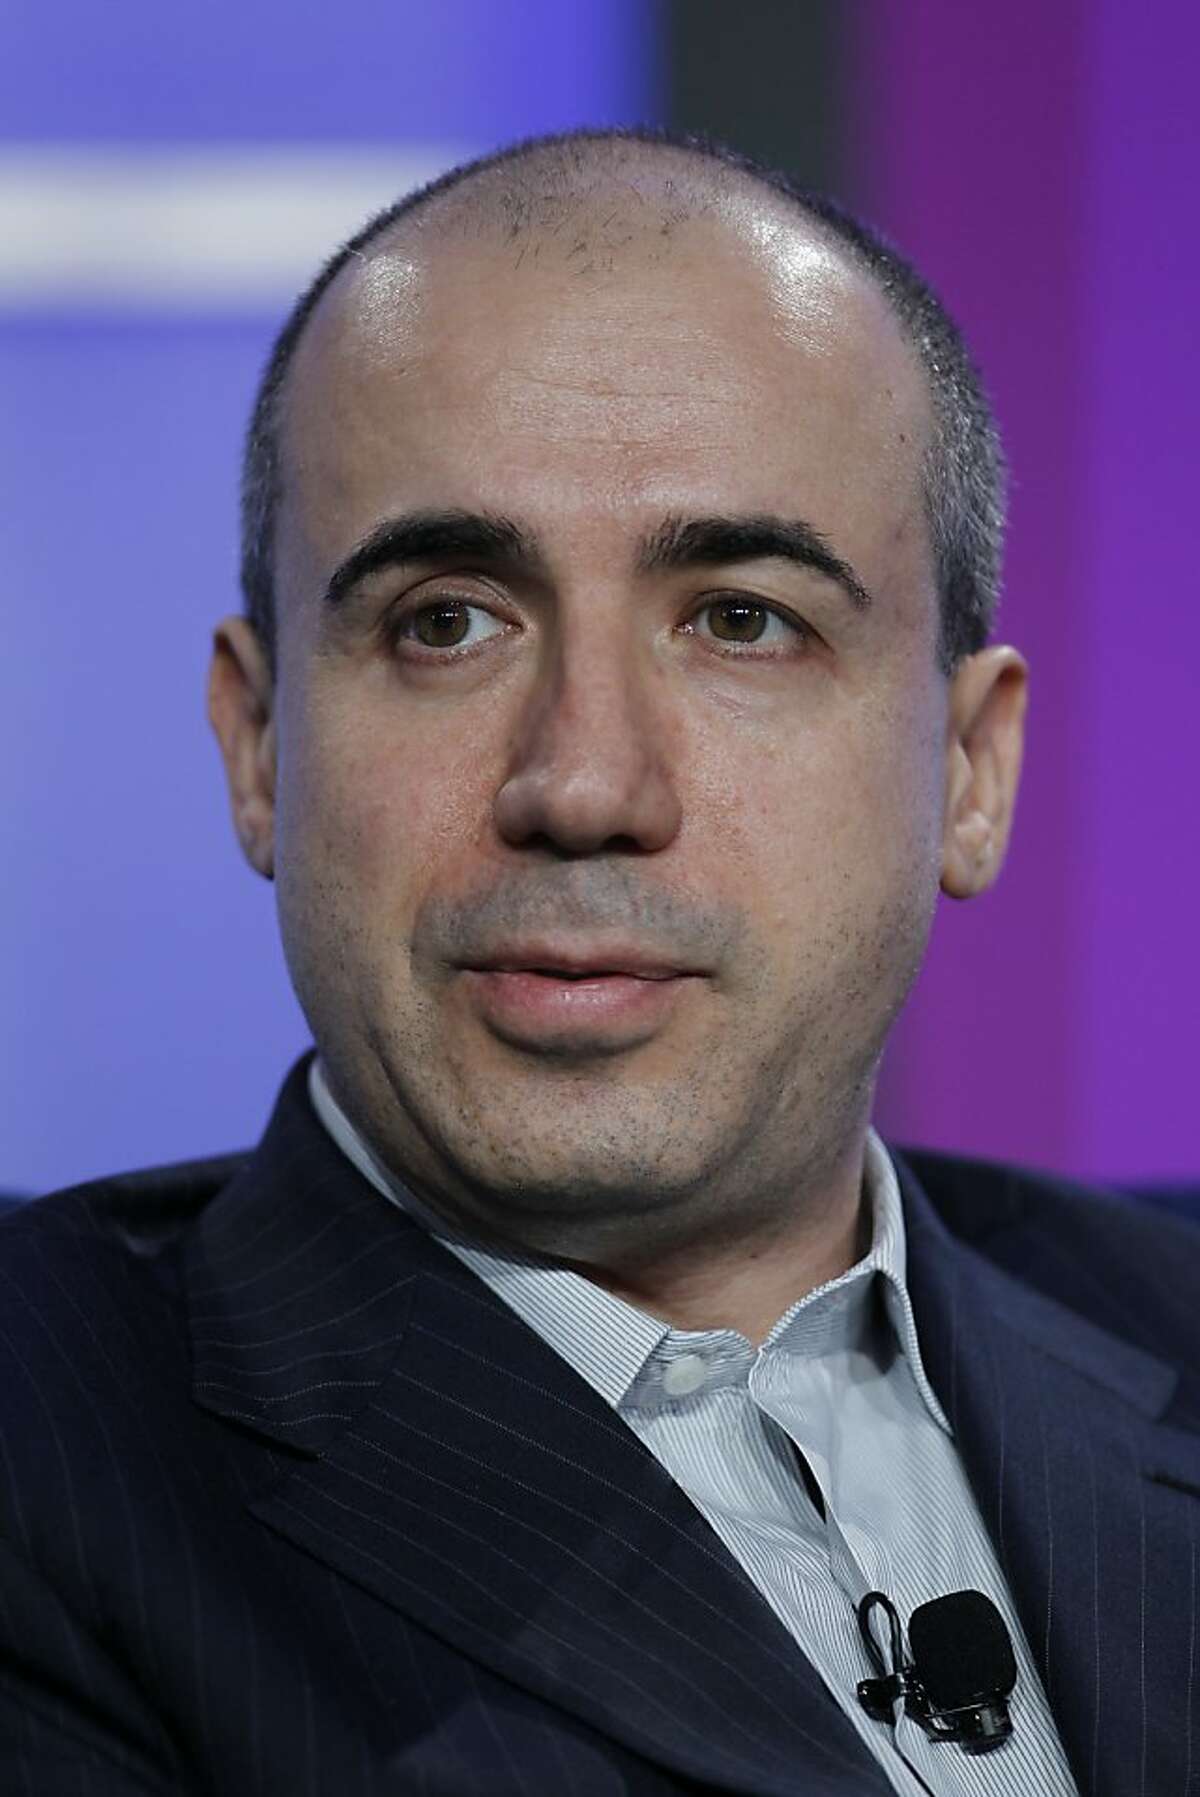 FILE - Yuri Milner, CEO of Digital Sky Technologies, is seen in this Tuesday, Nov. 16, 2010 file photo speaking at the Web 2.0 Summit in San Francisco. Milner, a Russian billionaire investor, has purchased a 25,000-square-foot mansion in Silicon Valley for $100 million, one of the highest prices ever paid in the U.S. for a single-family home.